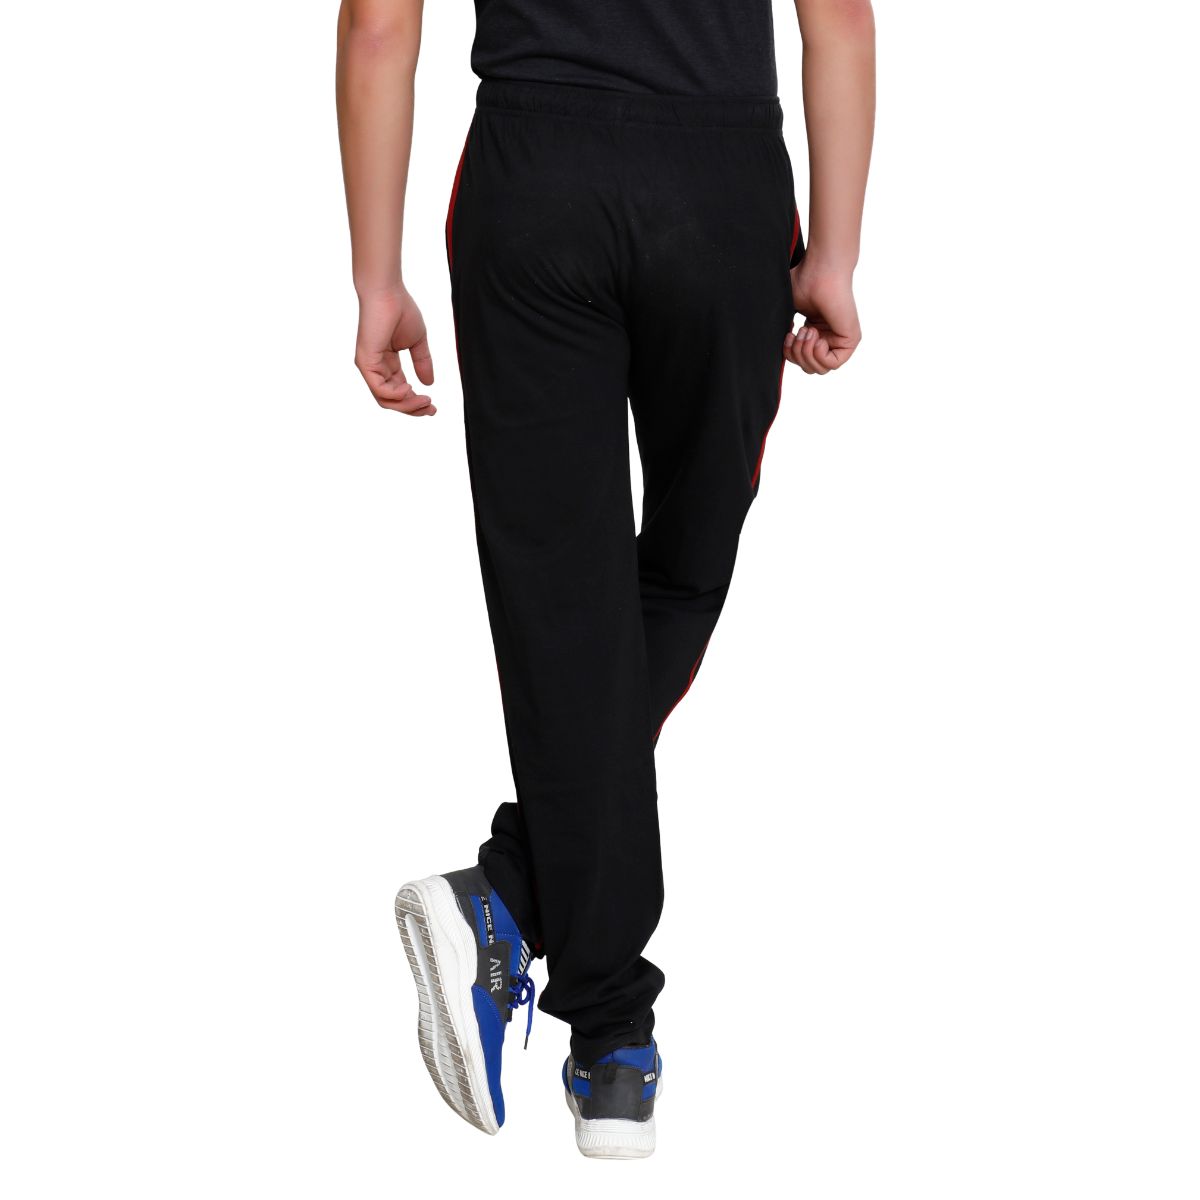 Regular Fit Track pants For Men Sportswear Boys Light Weight Breathable Gym  Wear Yoga Pants Tracking